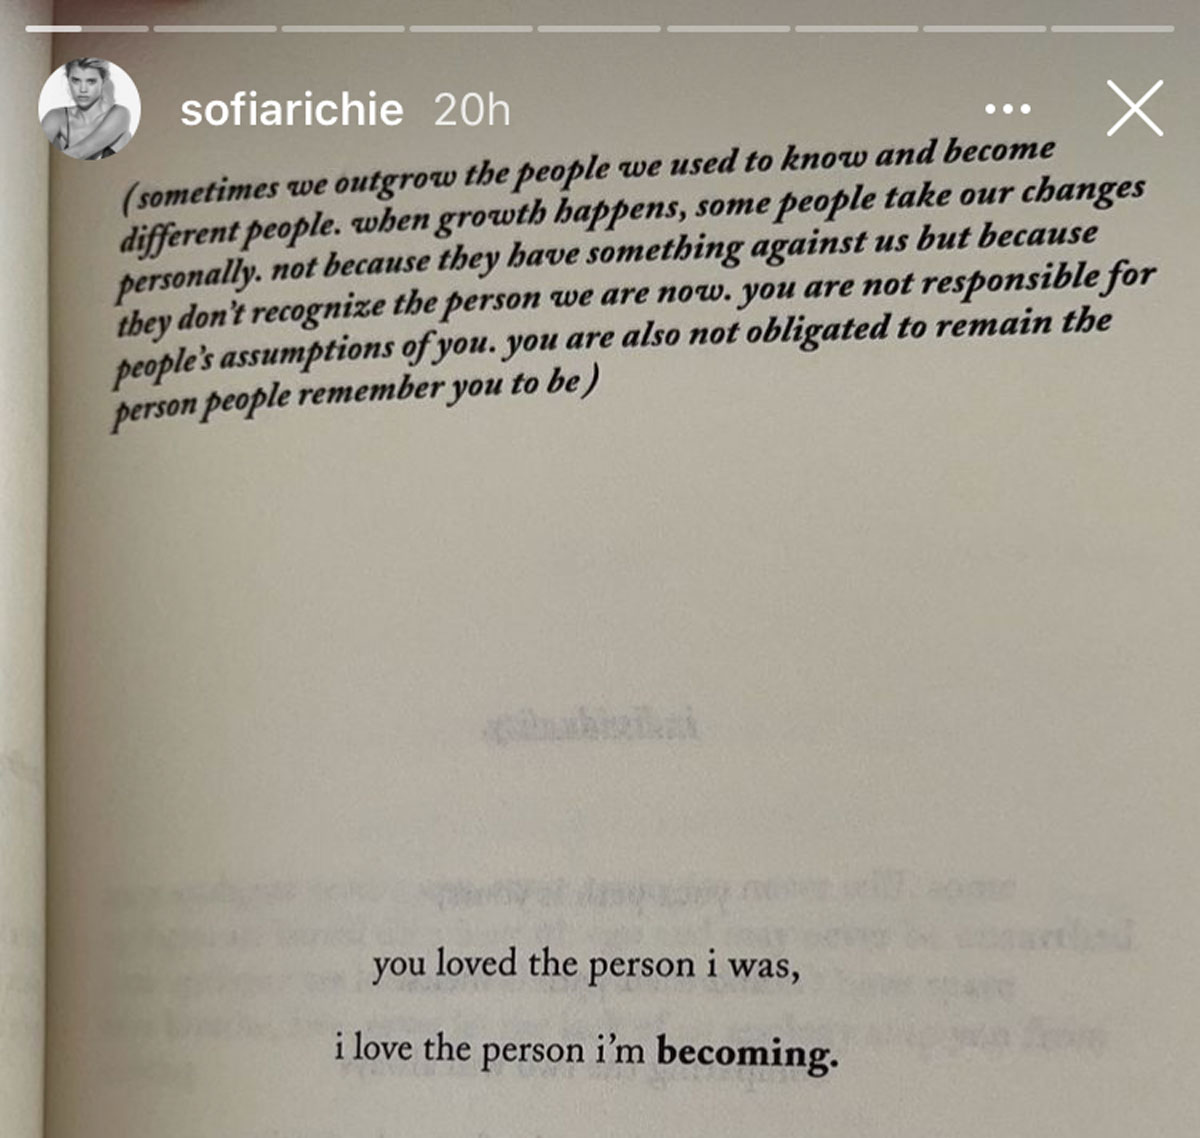 Sofia Richie posts two cryptic Instagram notes about love and learning, months after Scott Disick breakup!